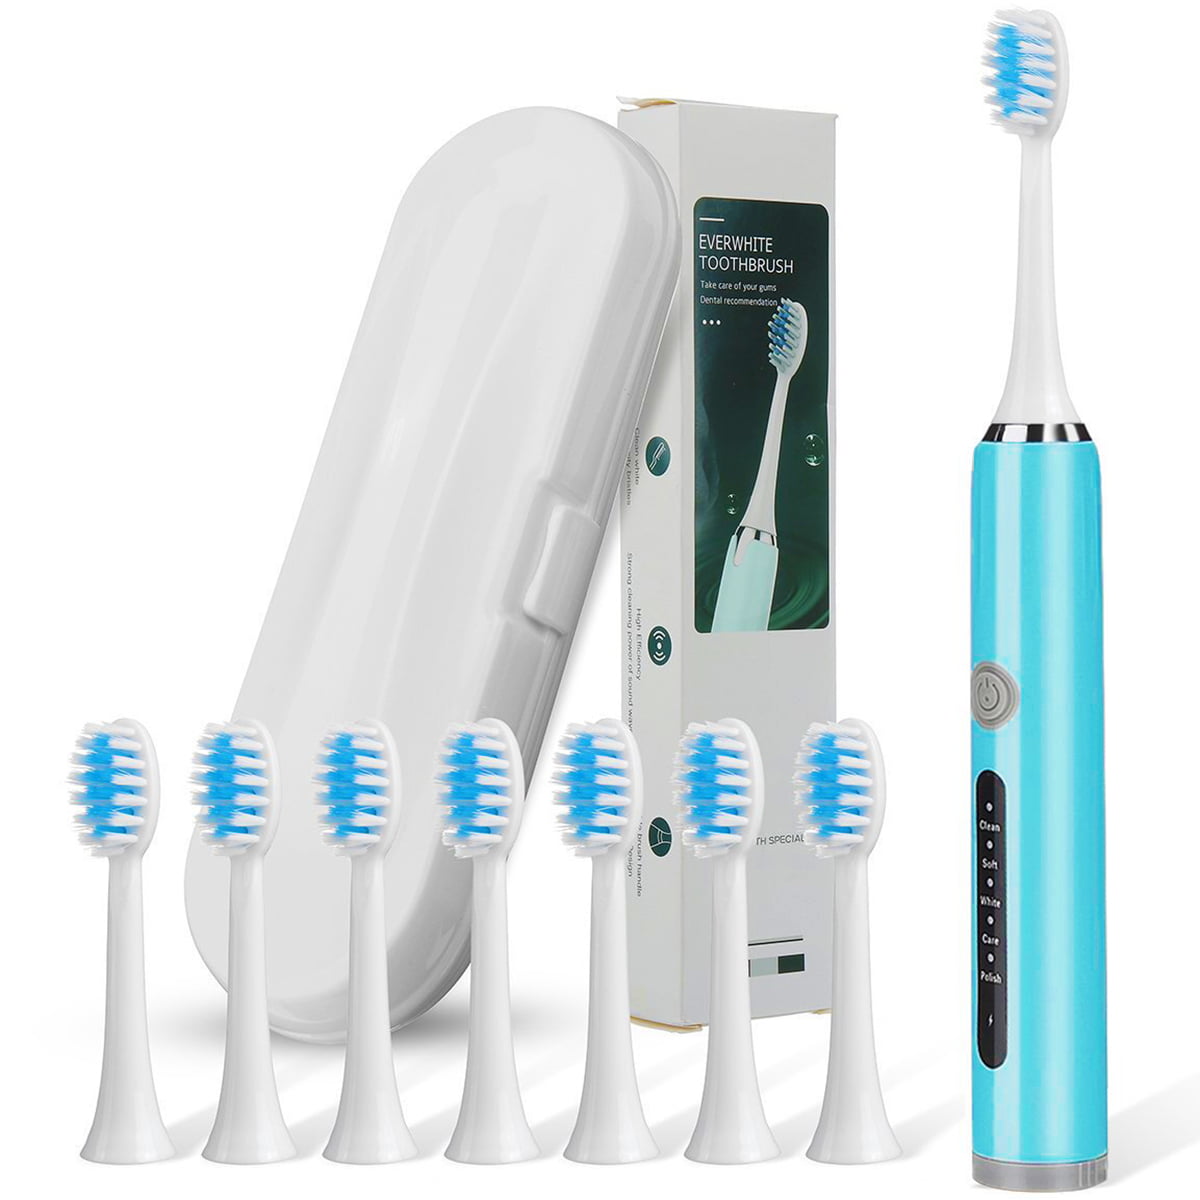 crgrtght Electric Toothbrush, Electric Toothbrush with 8 Brush Heads,with  Toothbrush Box, 5 Cleaning Modes,Electric Toothbrush Rechargeable,Smart